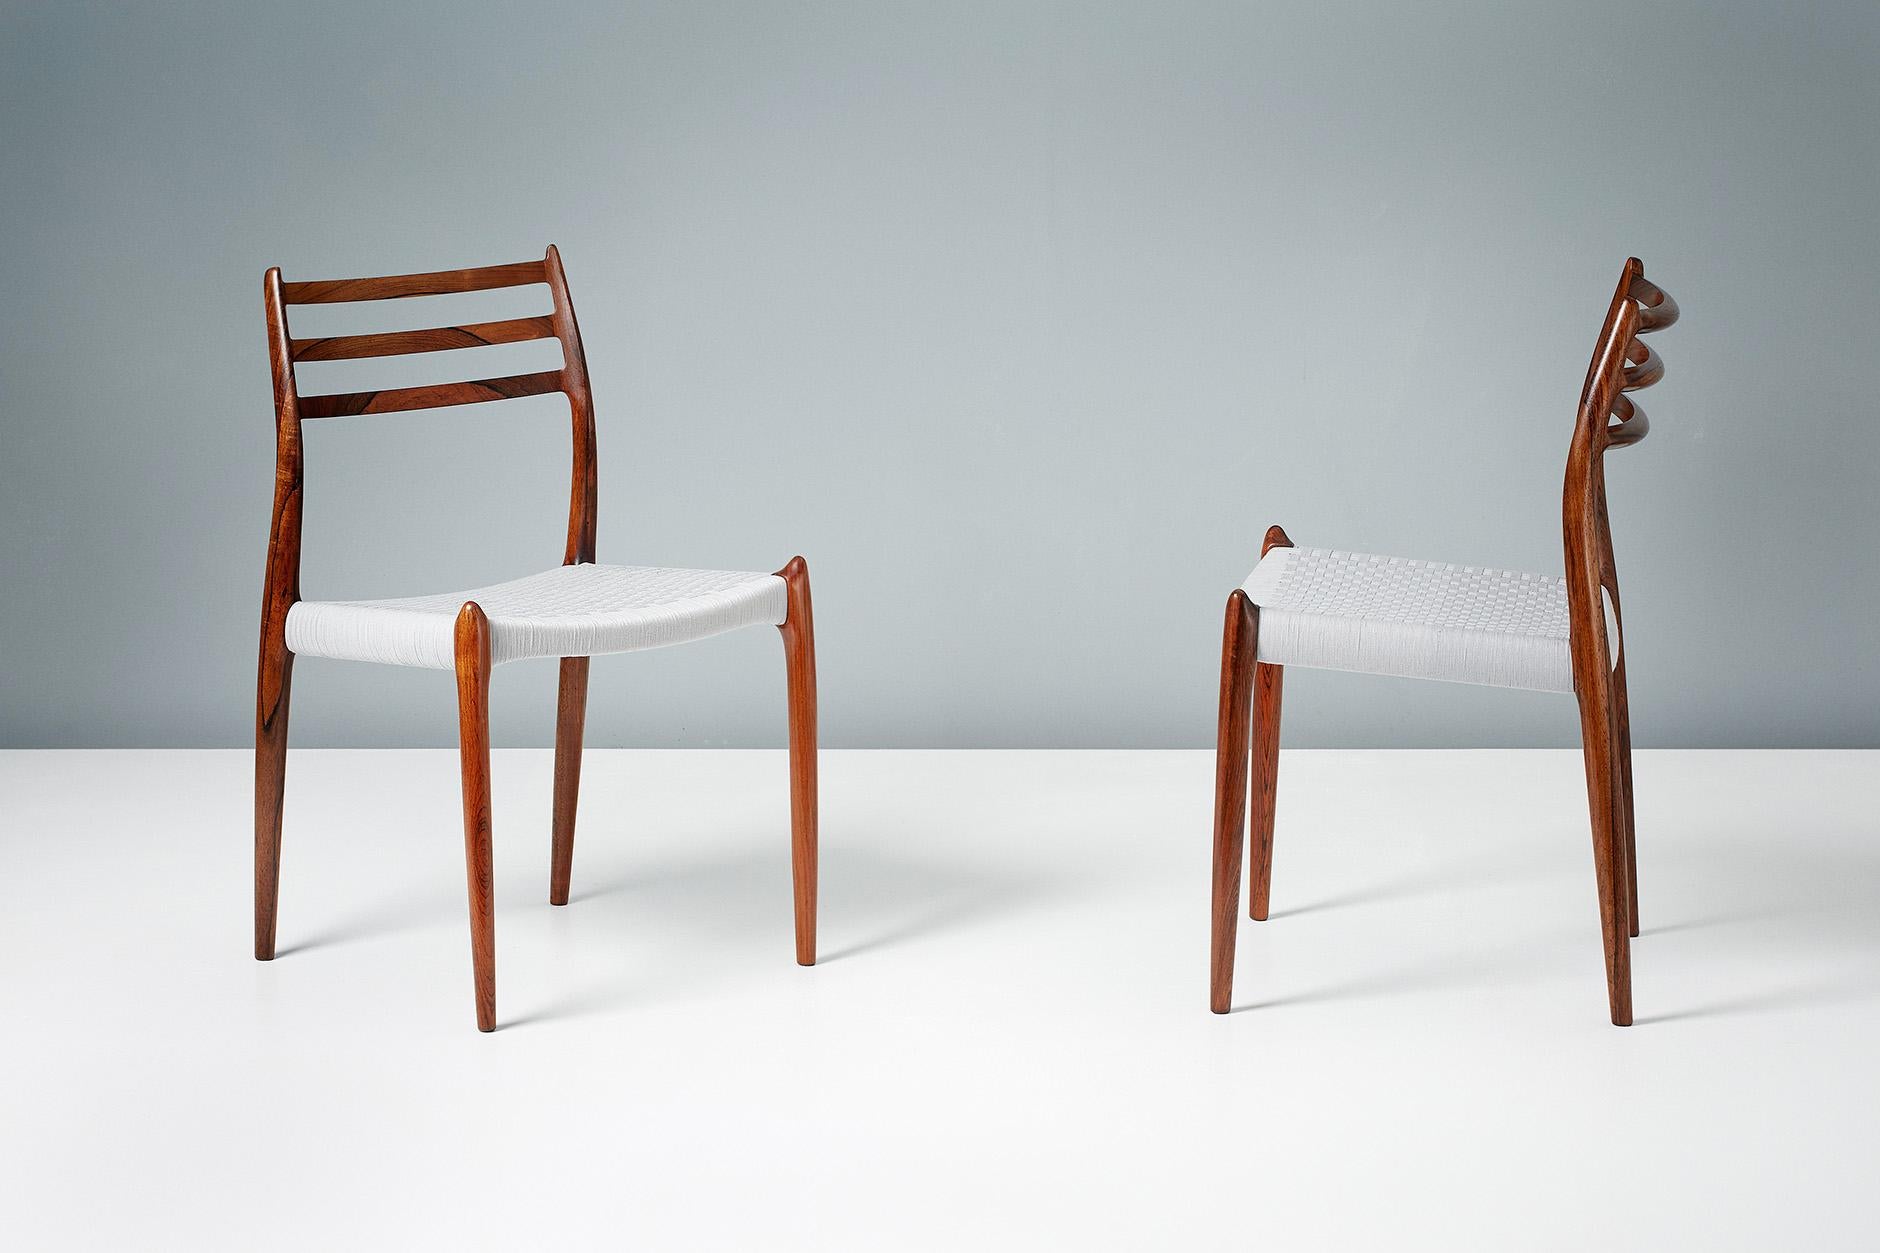 Niels O. Møller

Model 78 dining chairs, 1962

Set of 8 iconic model 78 dining chairs designed by Niels O. Møller for J.L. Moller Mobelfabrik, Denmark in 1962. The frames are made from highly figured, exquisite Brazilian rosewood, the finest of